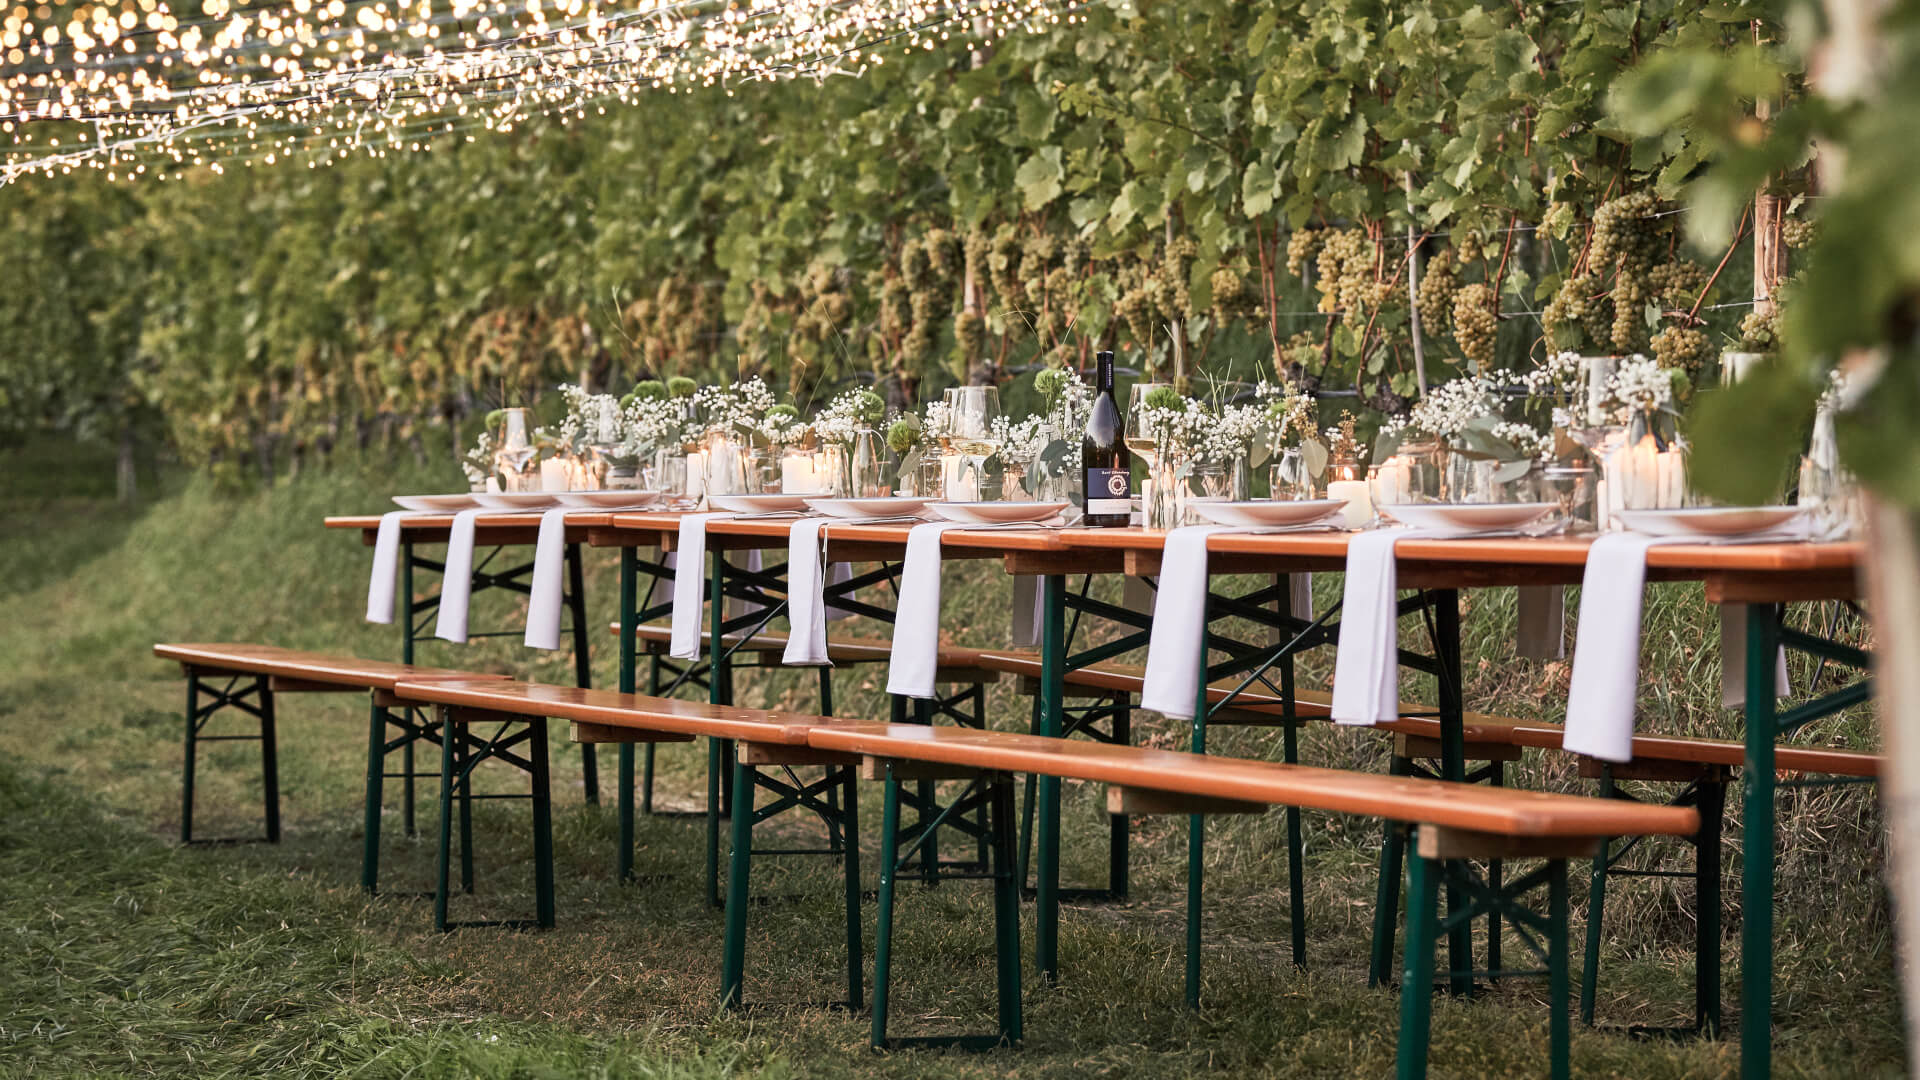 The wide beer garden table set has been placed in the greenery and decorated with white decorations.